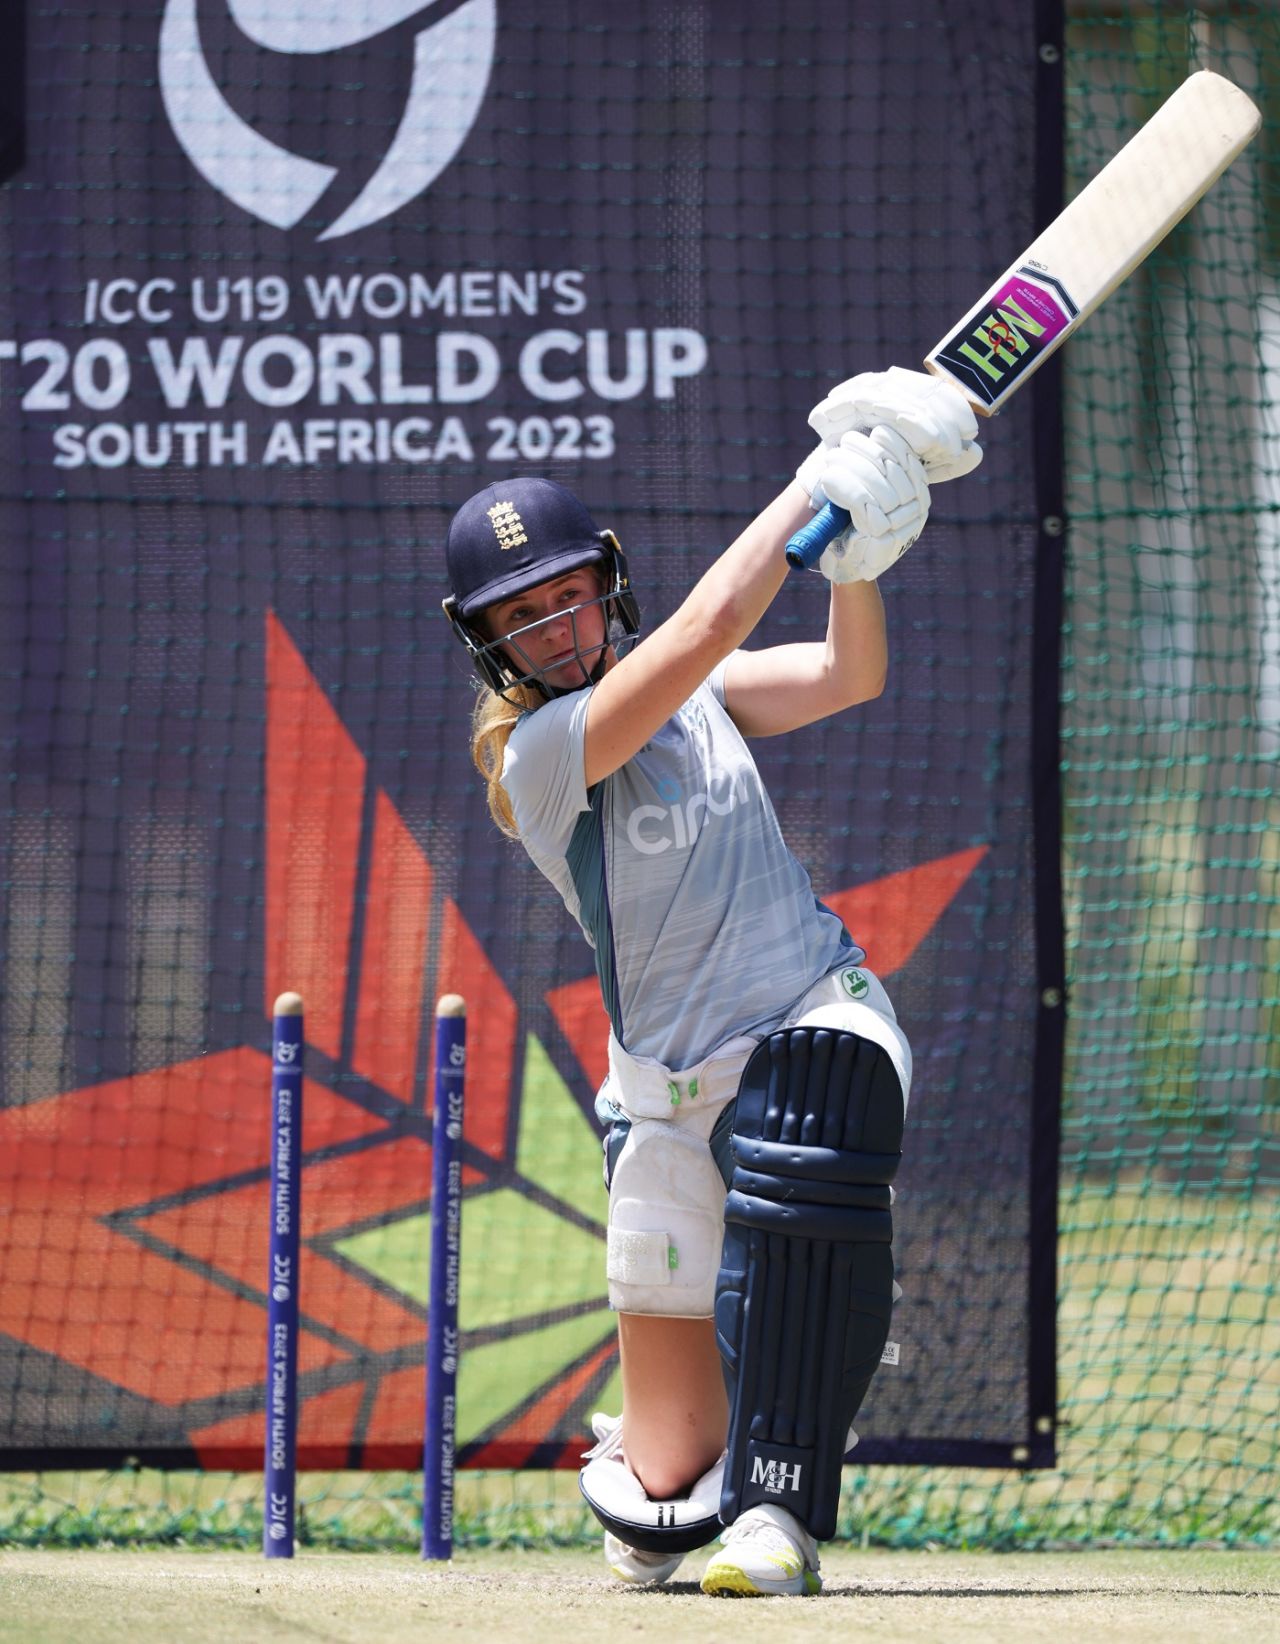 Liberty Heap bats in the nets, Under-19 Women's T20 World Cup, Potchefstroom, January 28, 2023